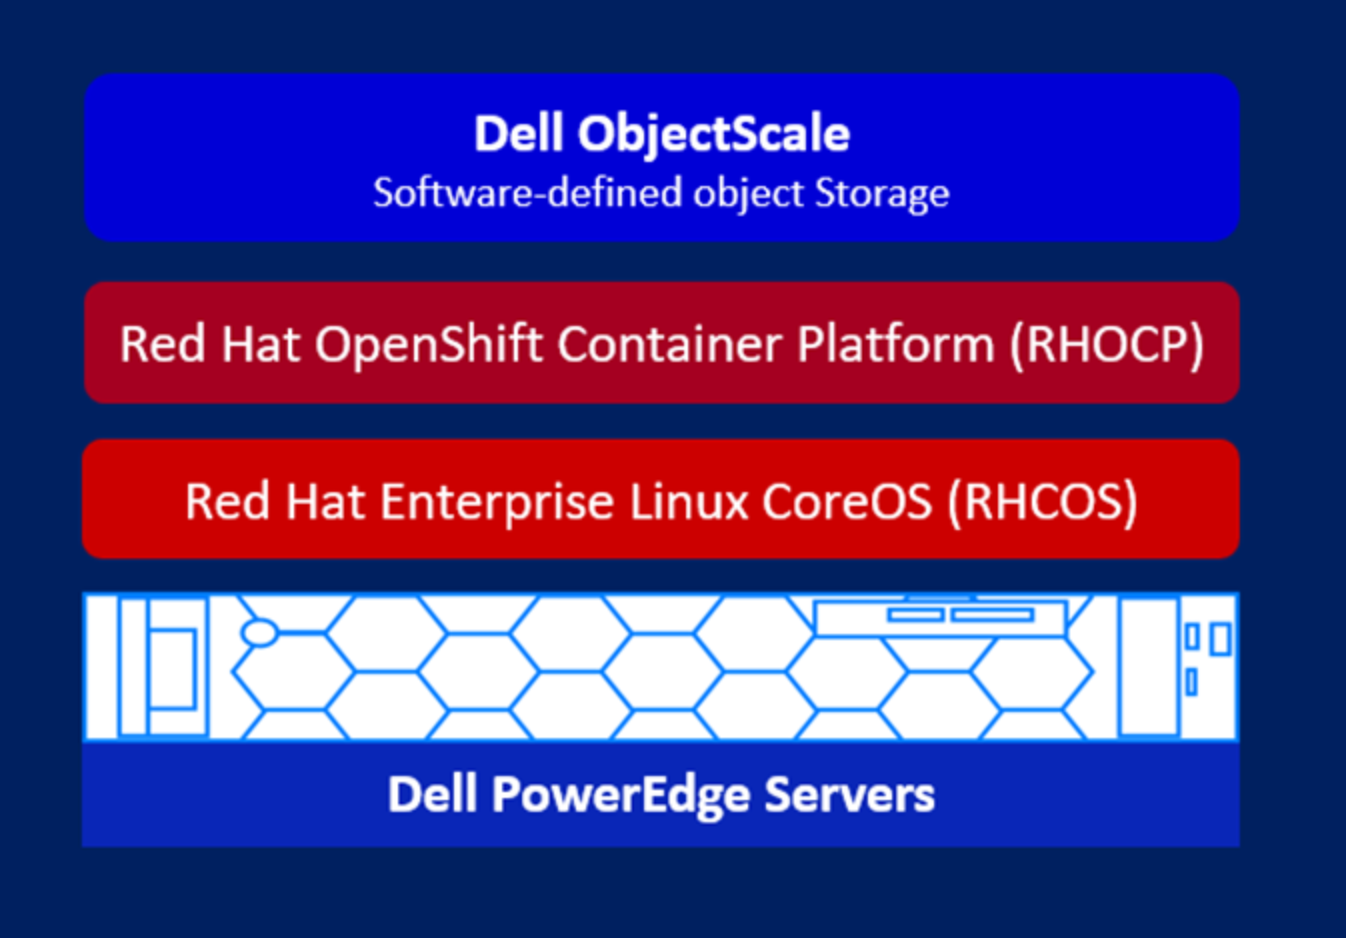 This diagram includes Dell Object Scale, REd Hat OpenShift Container Platform, Red Hat Linux CoreOS, and Dell PowerEdge Servers